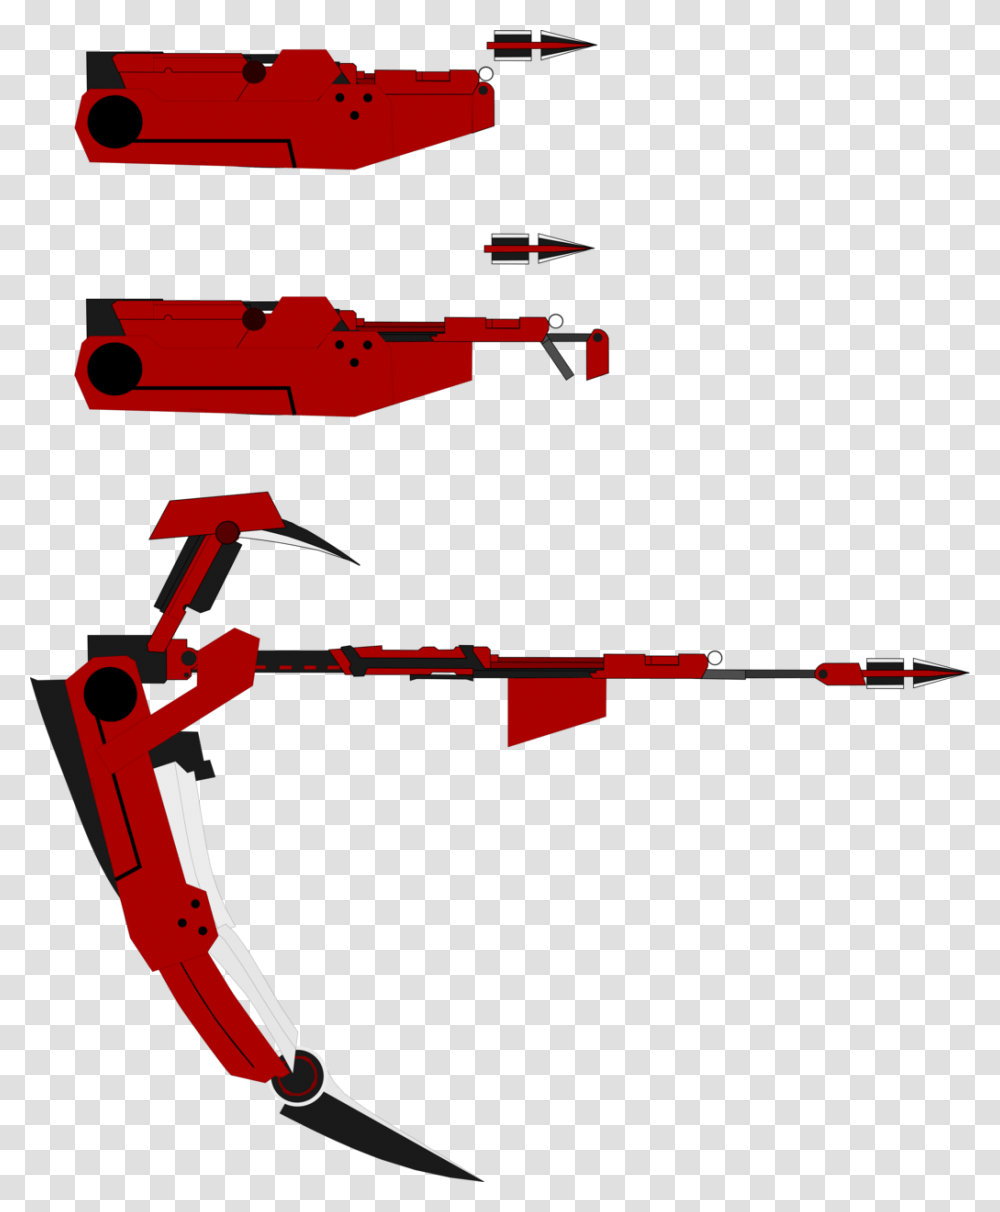 Our First Subject Is Crescent Rose Used By Ruby Rose Rwby Crescent Rose Compact, Bow, Tool, Weapon, Weaponry Transparent Png